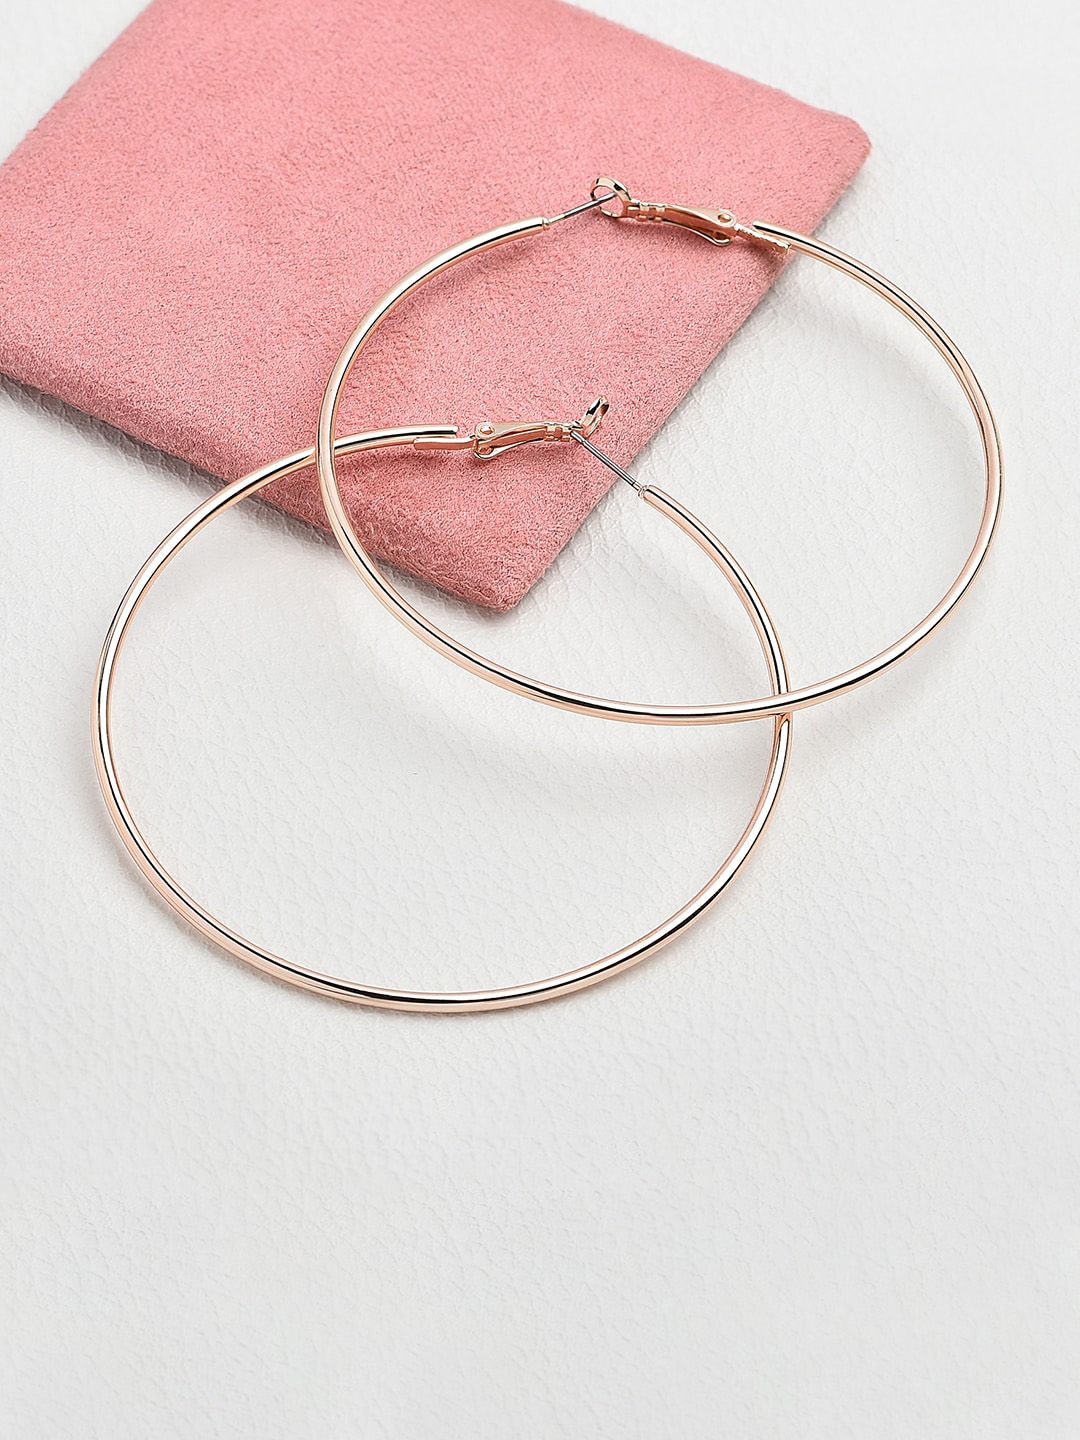 Accessorize Rose Gold Circular Hoop Earrings Price in India